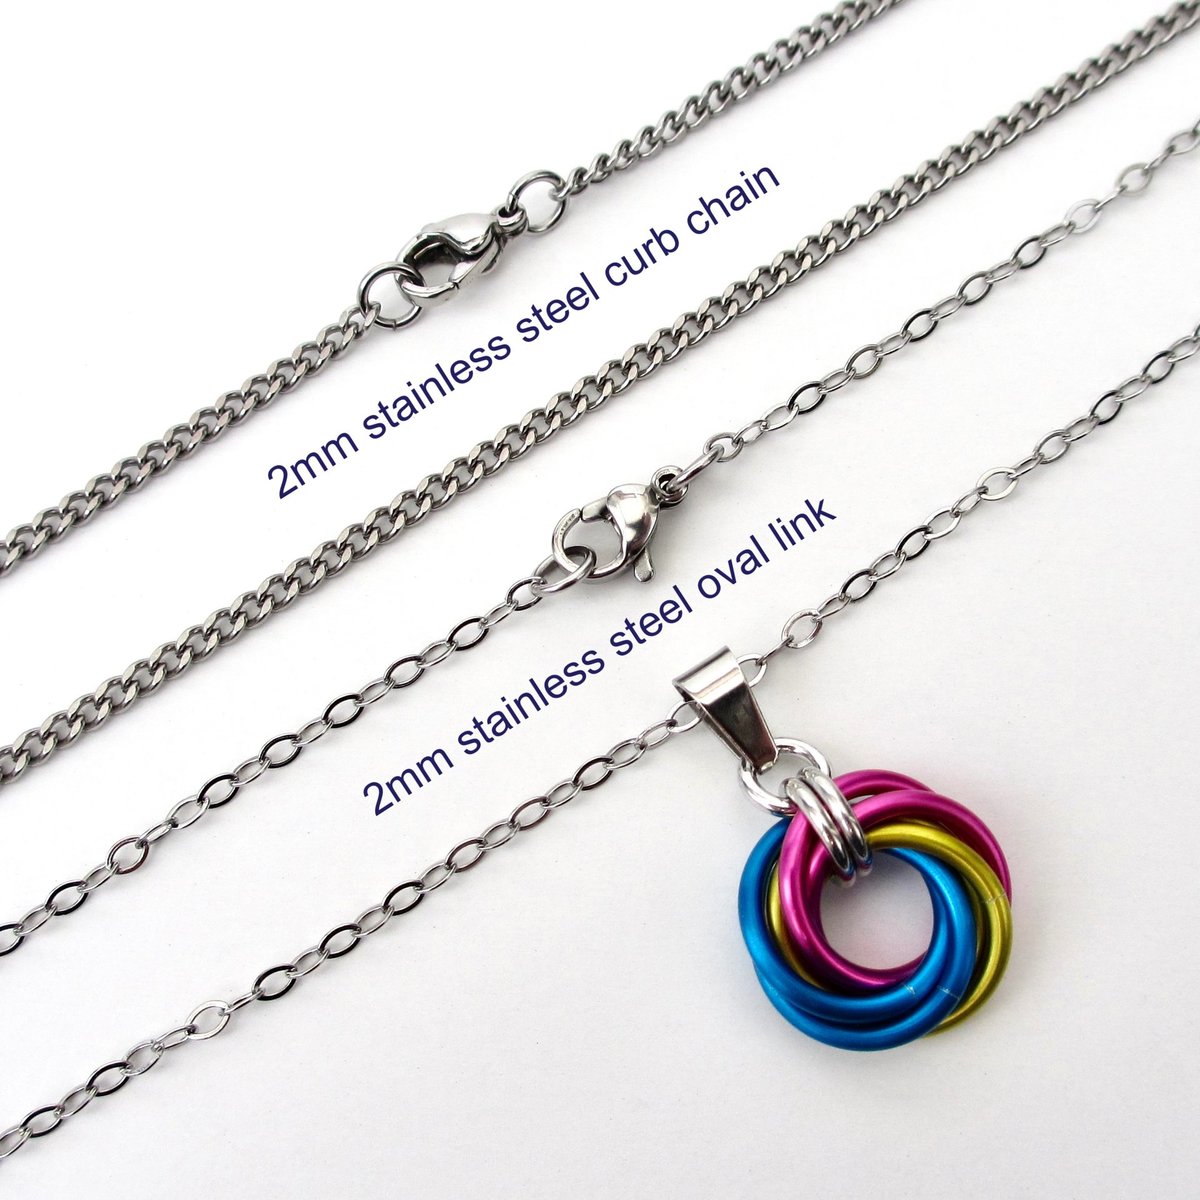 Pansexual pride pendant necklace, chainmail love knot, pan pride jewelry, pink yellow blue